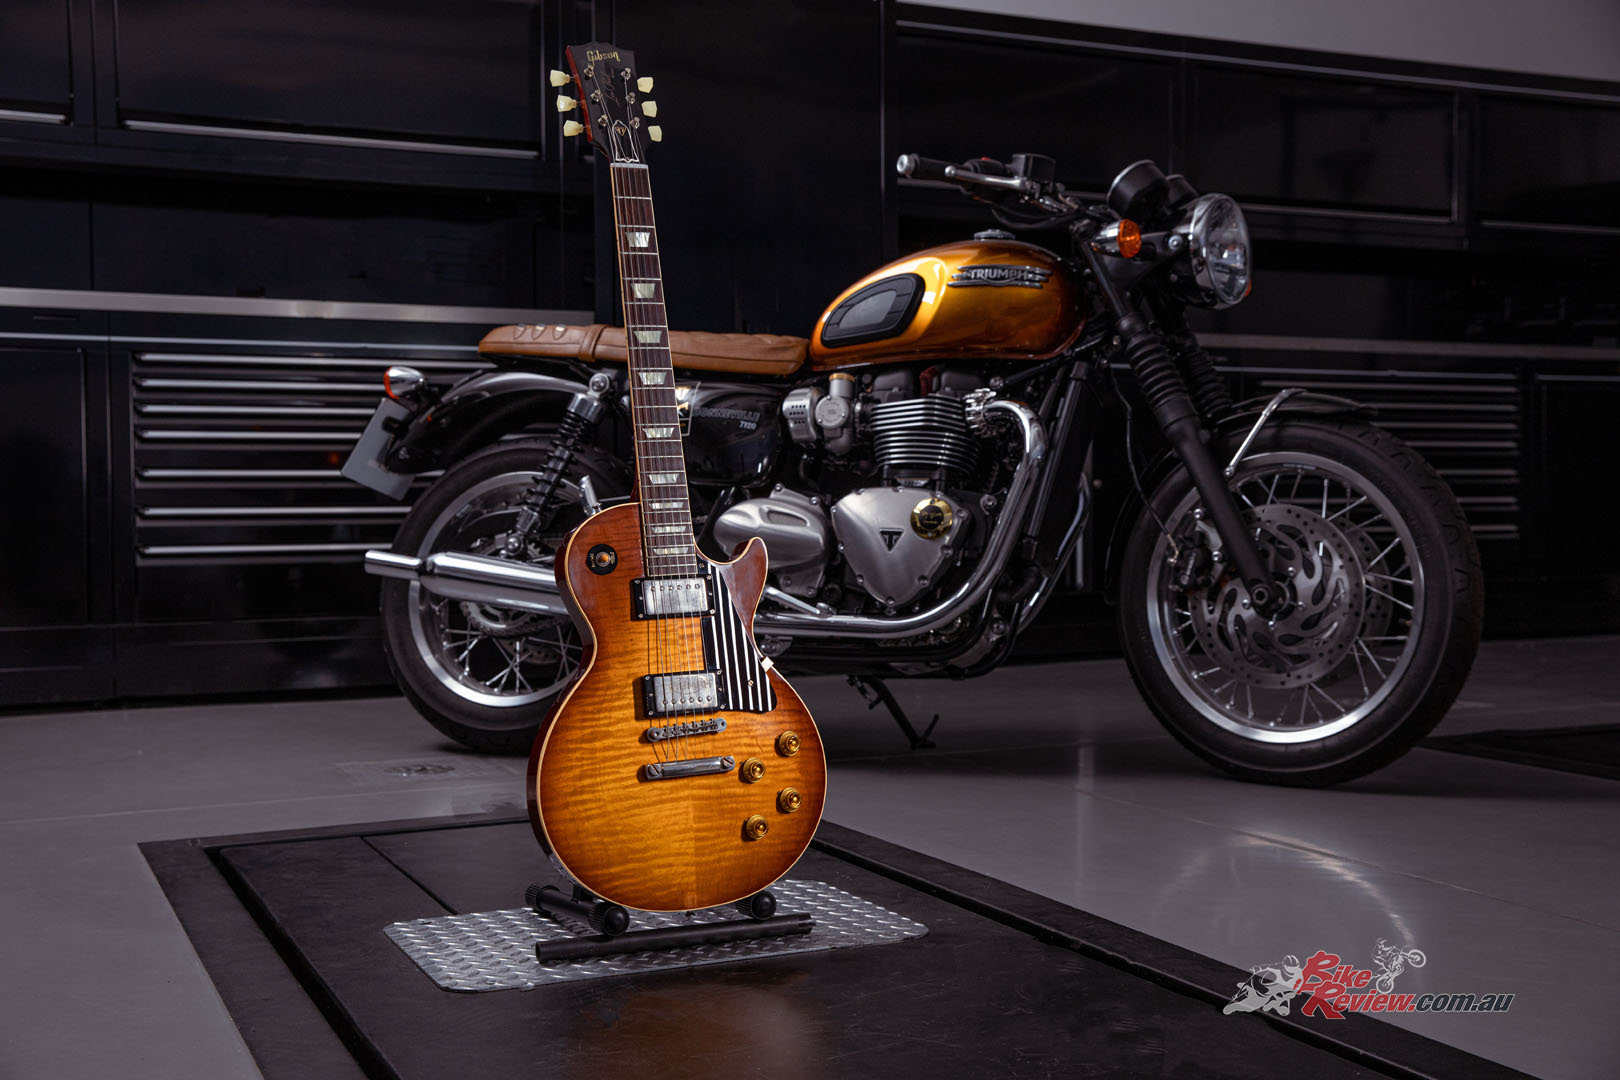 Triumph say they have been building on a shared passion for beauty, precision and performance, and inspired by the shared historical significance of the iconic 1959 Les Paul Standard and equally iconic 1959 Bonneville T120